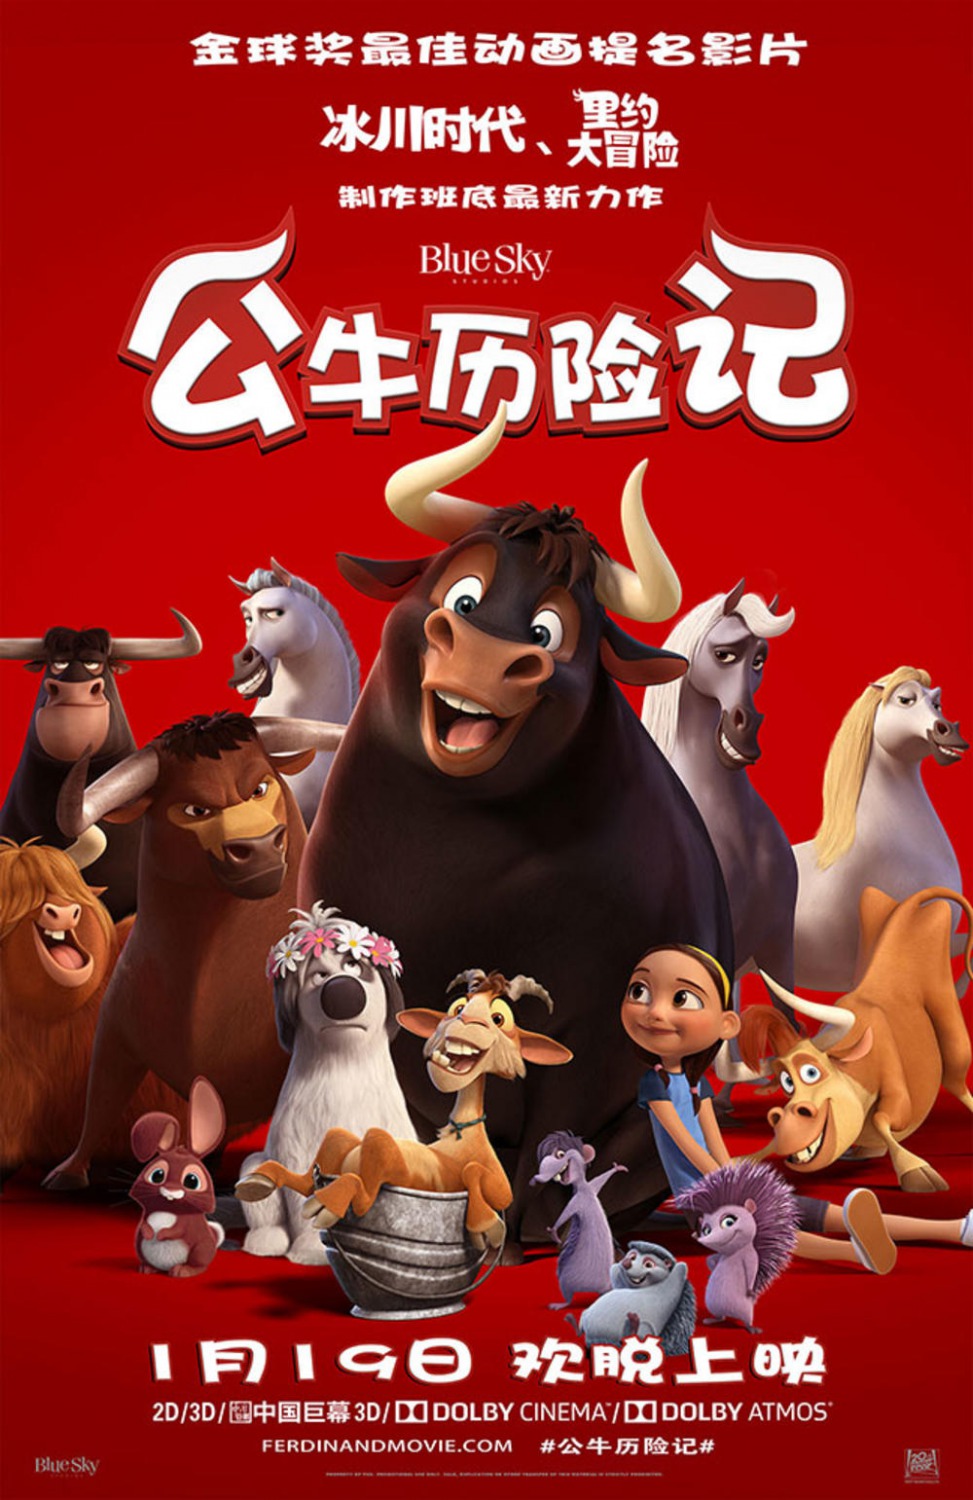 Extra Large Movie Poster Image for Ferdinand (#22 of 22)